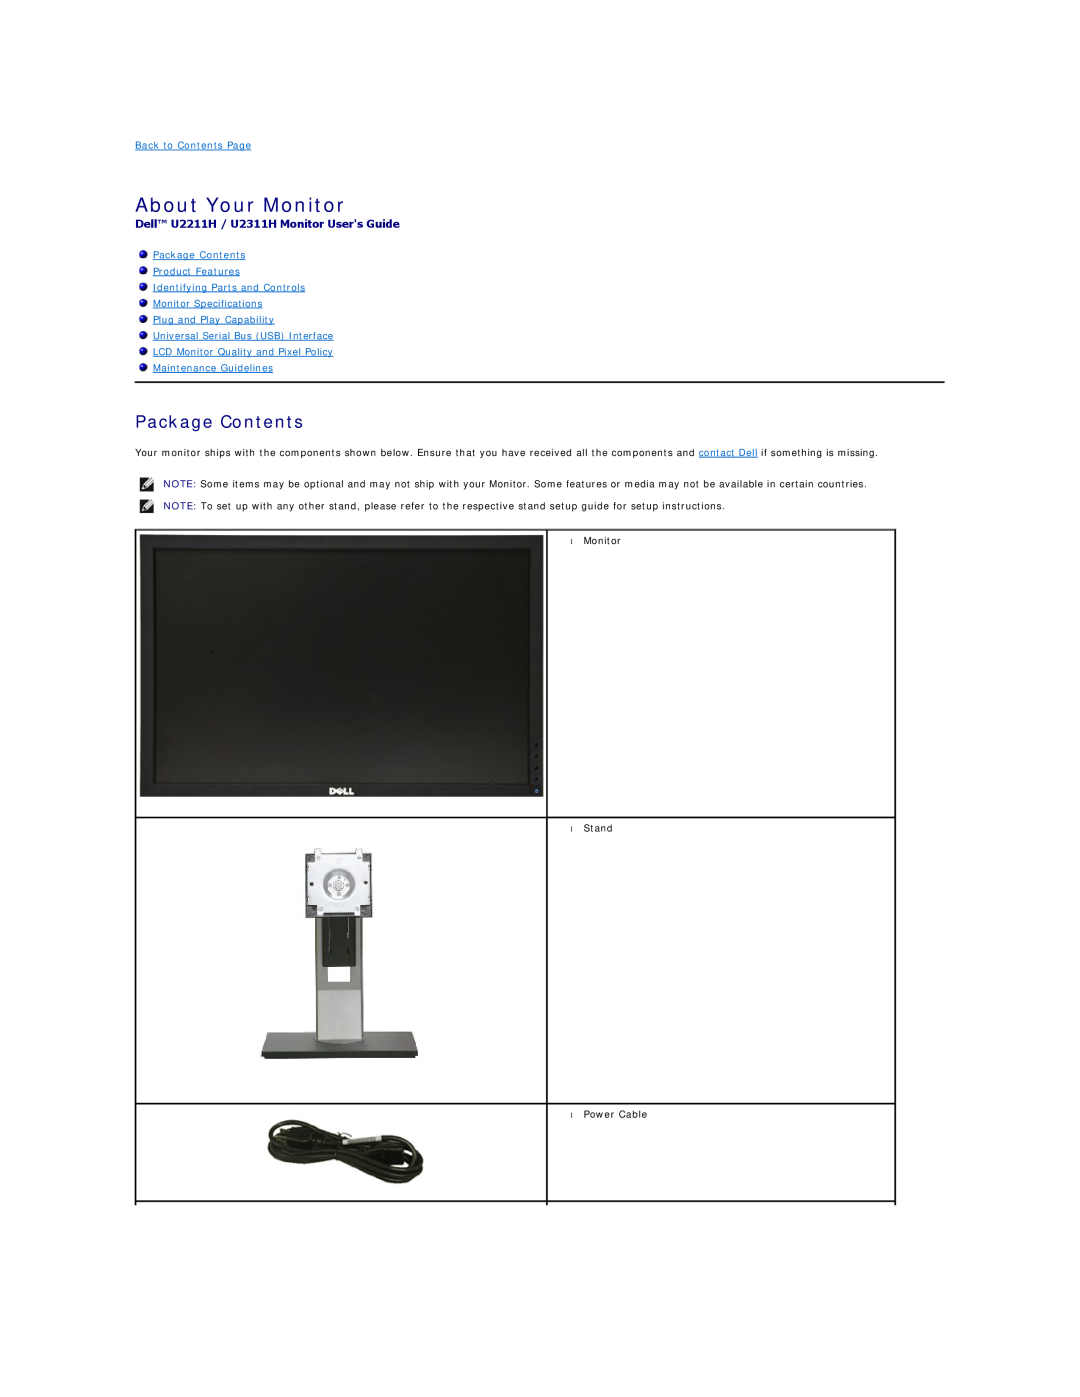 Dell appendix About Your Monitor, Package Contents, Dell U2211H / U2311H Monitor Users Guide, Back to Contents Page 